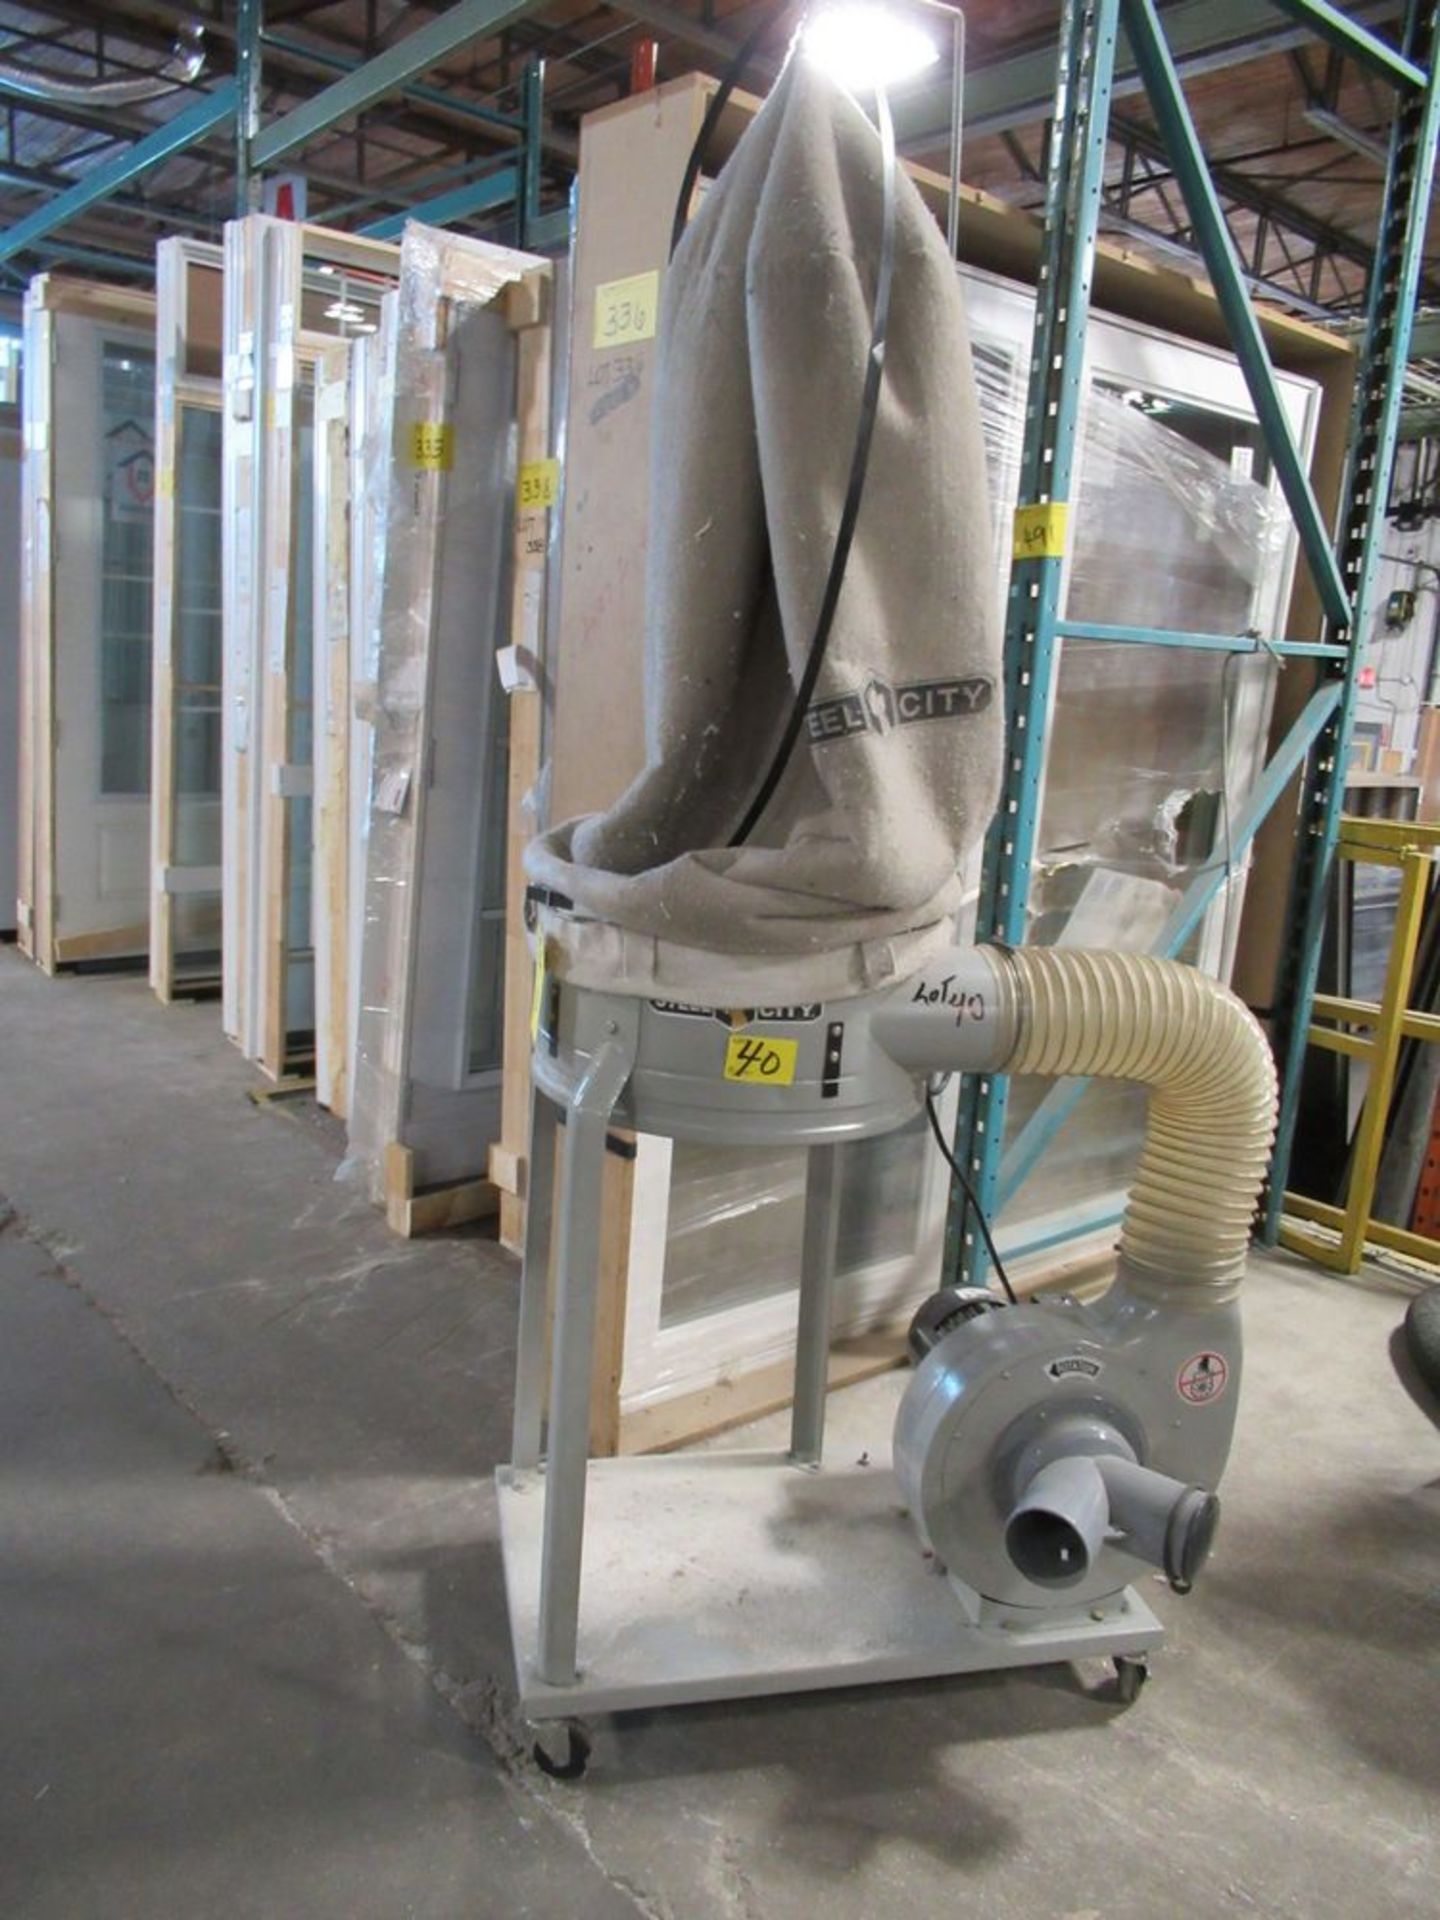 STEEL CITY 65200 1200 CFM 1.5HP PORTABLE DUST COLLECTOR - Image 2 of 3